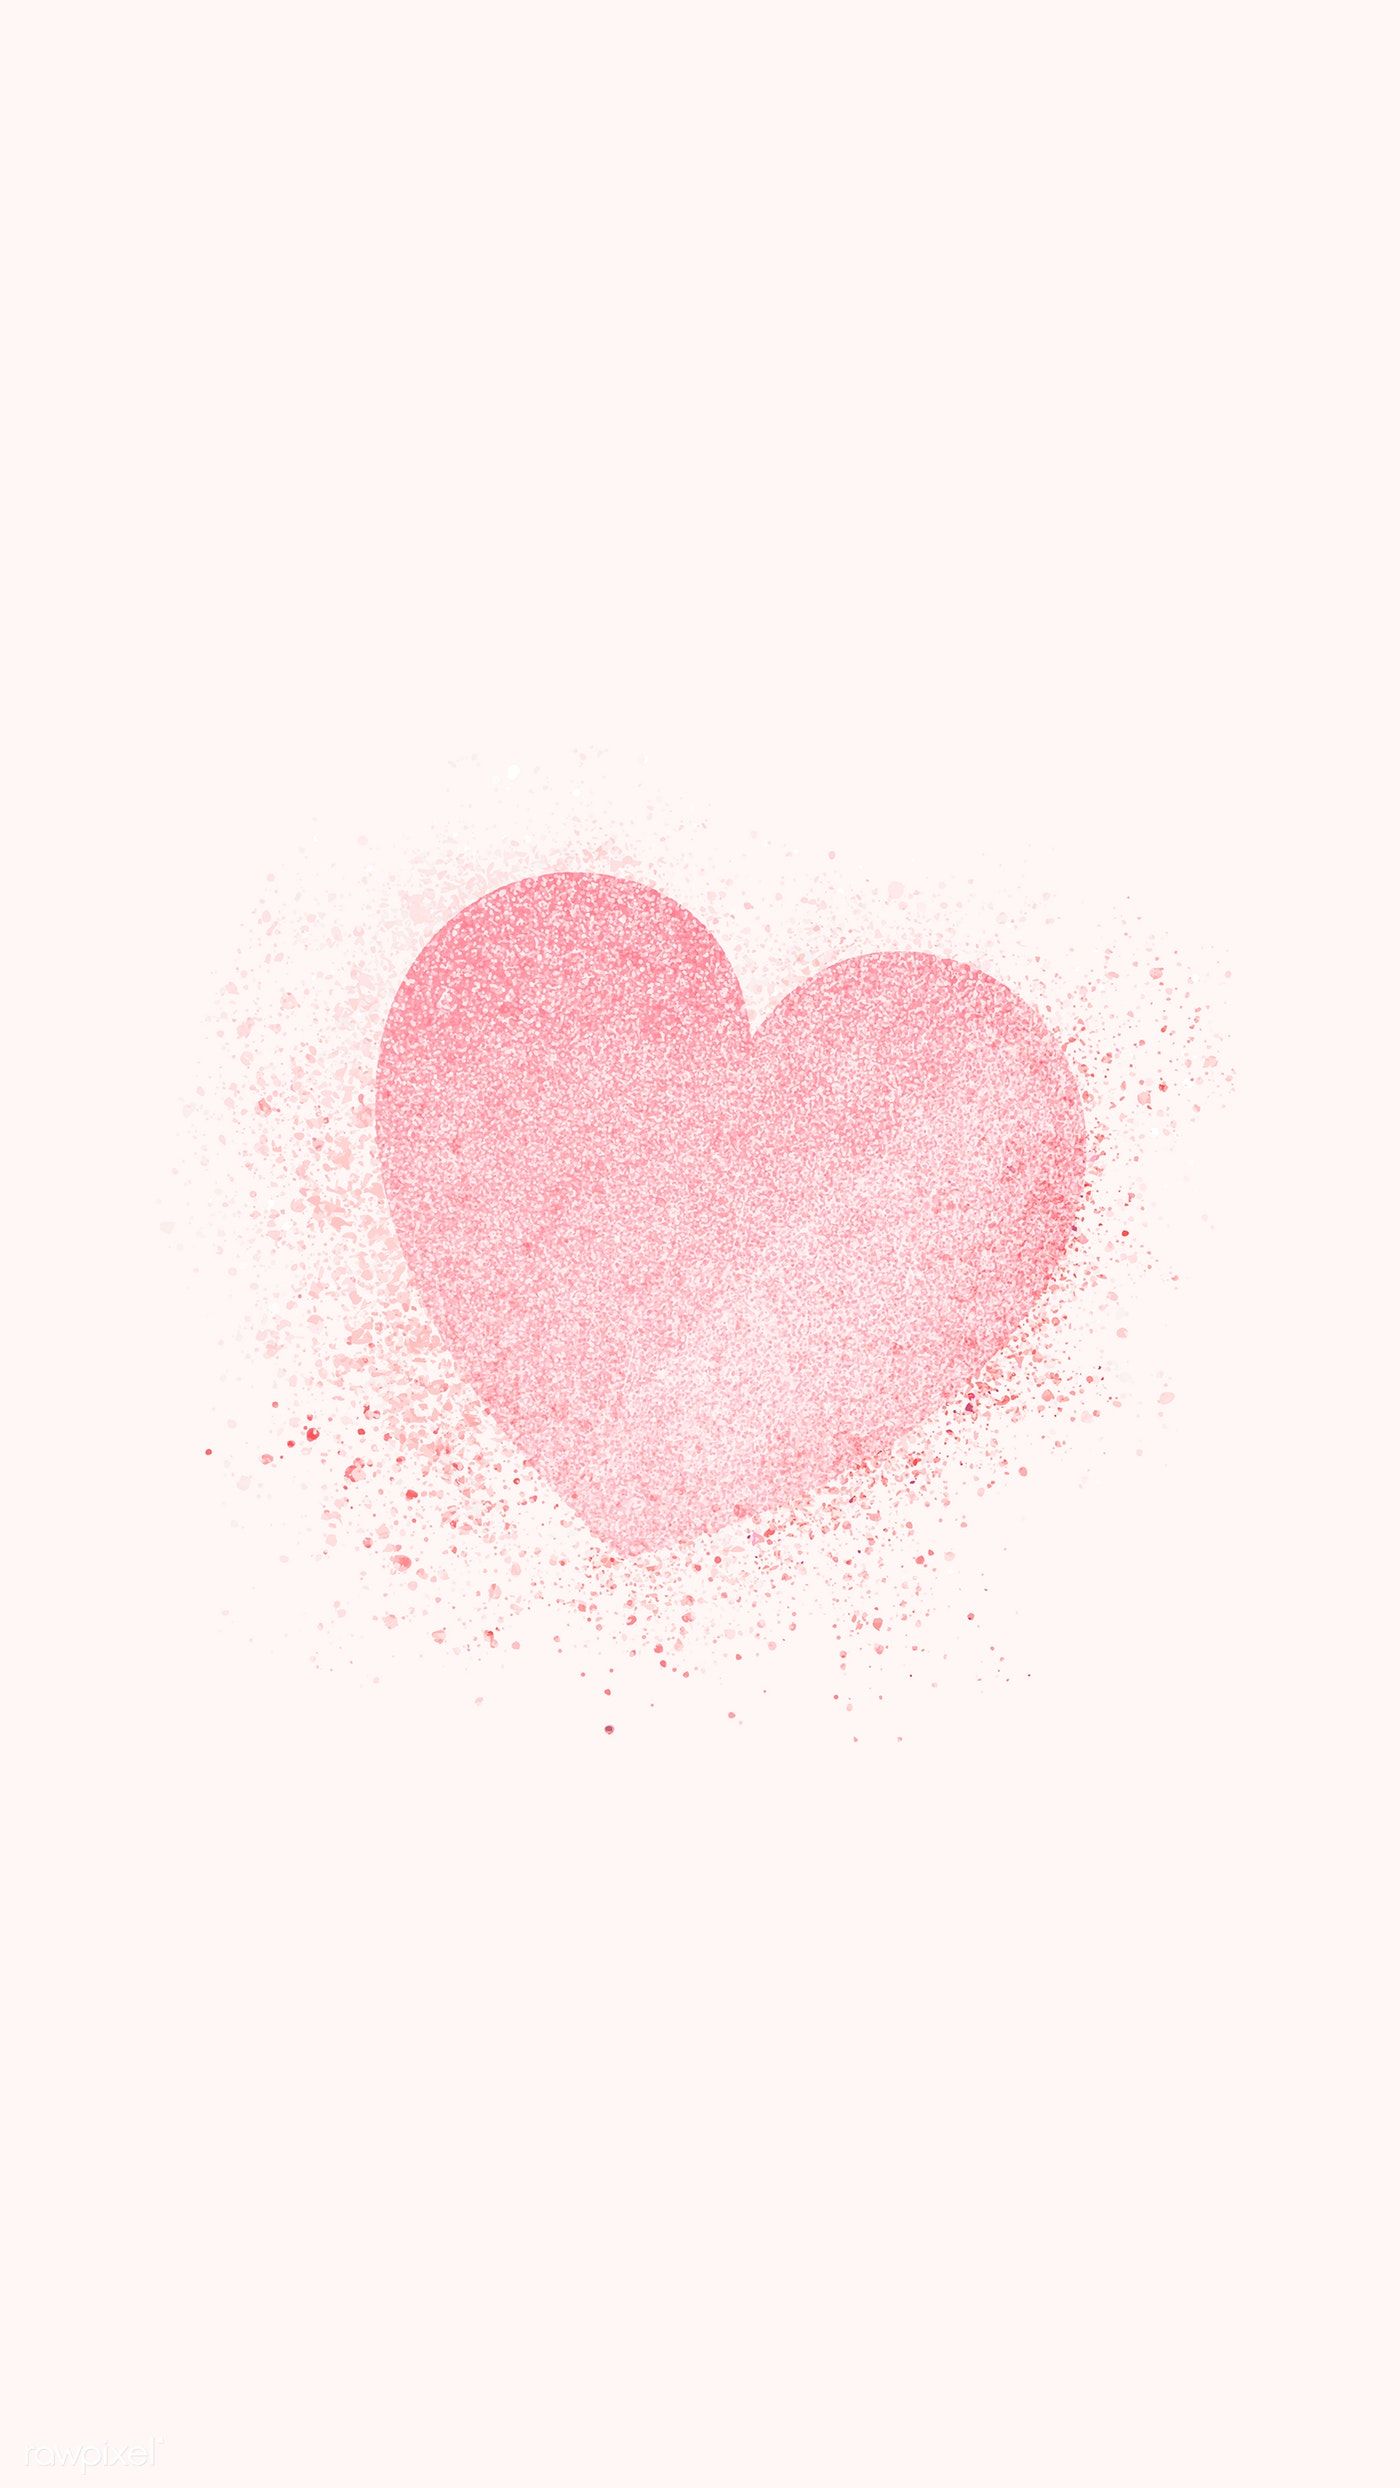 Download premium vector of Shimmering valentines pink heart vector by Kappy abou